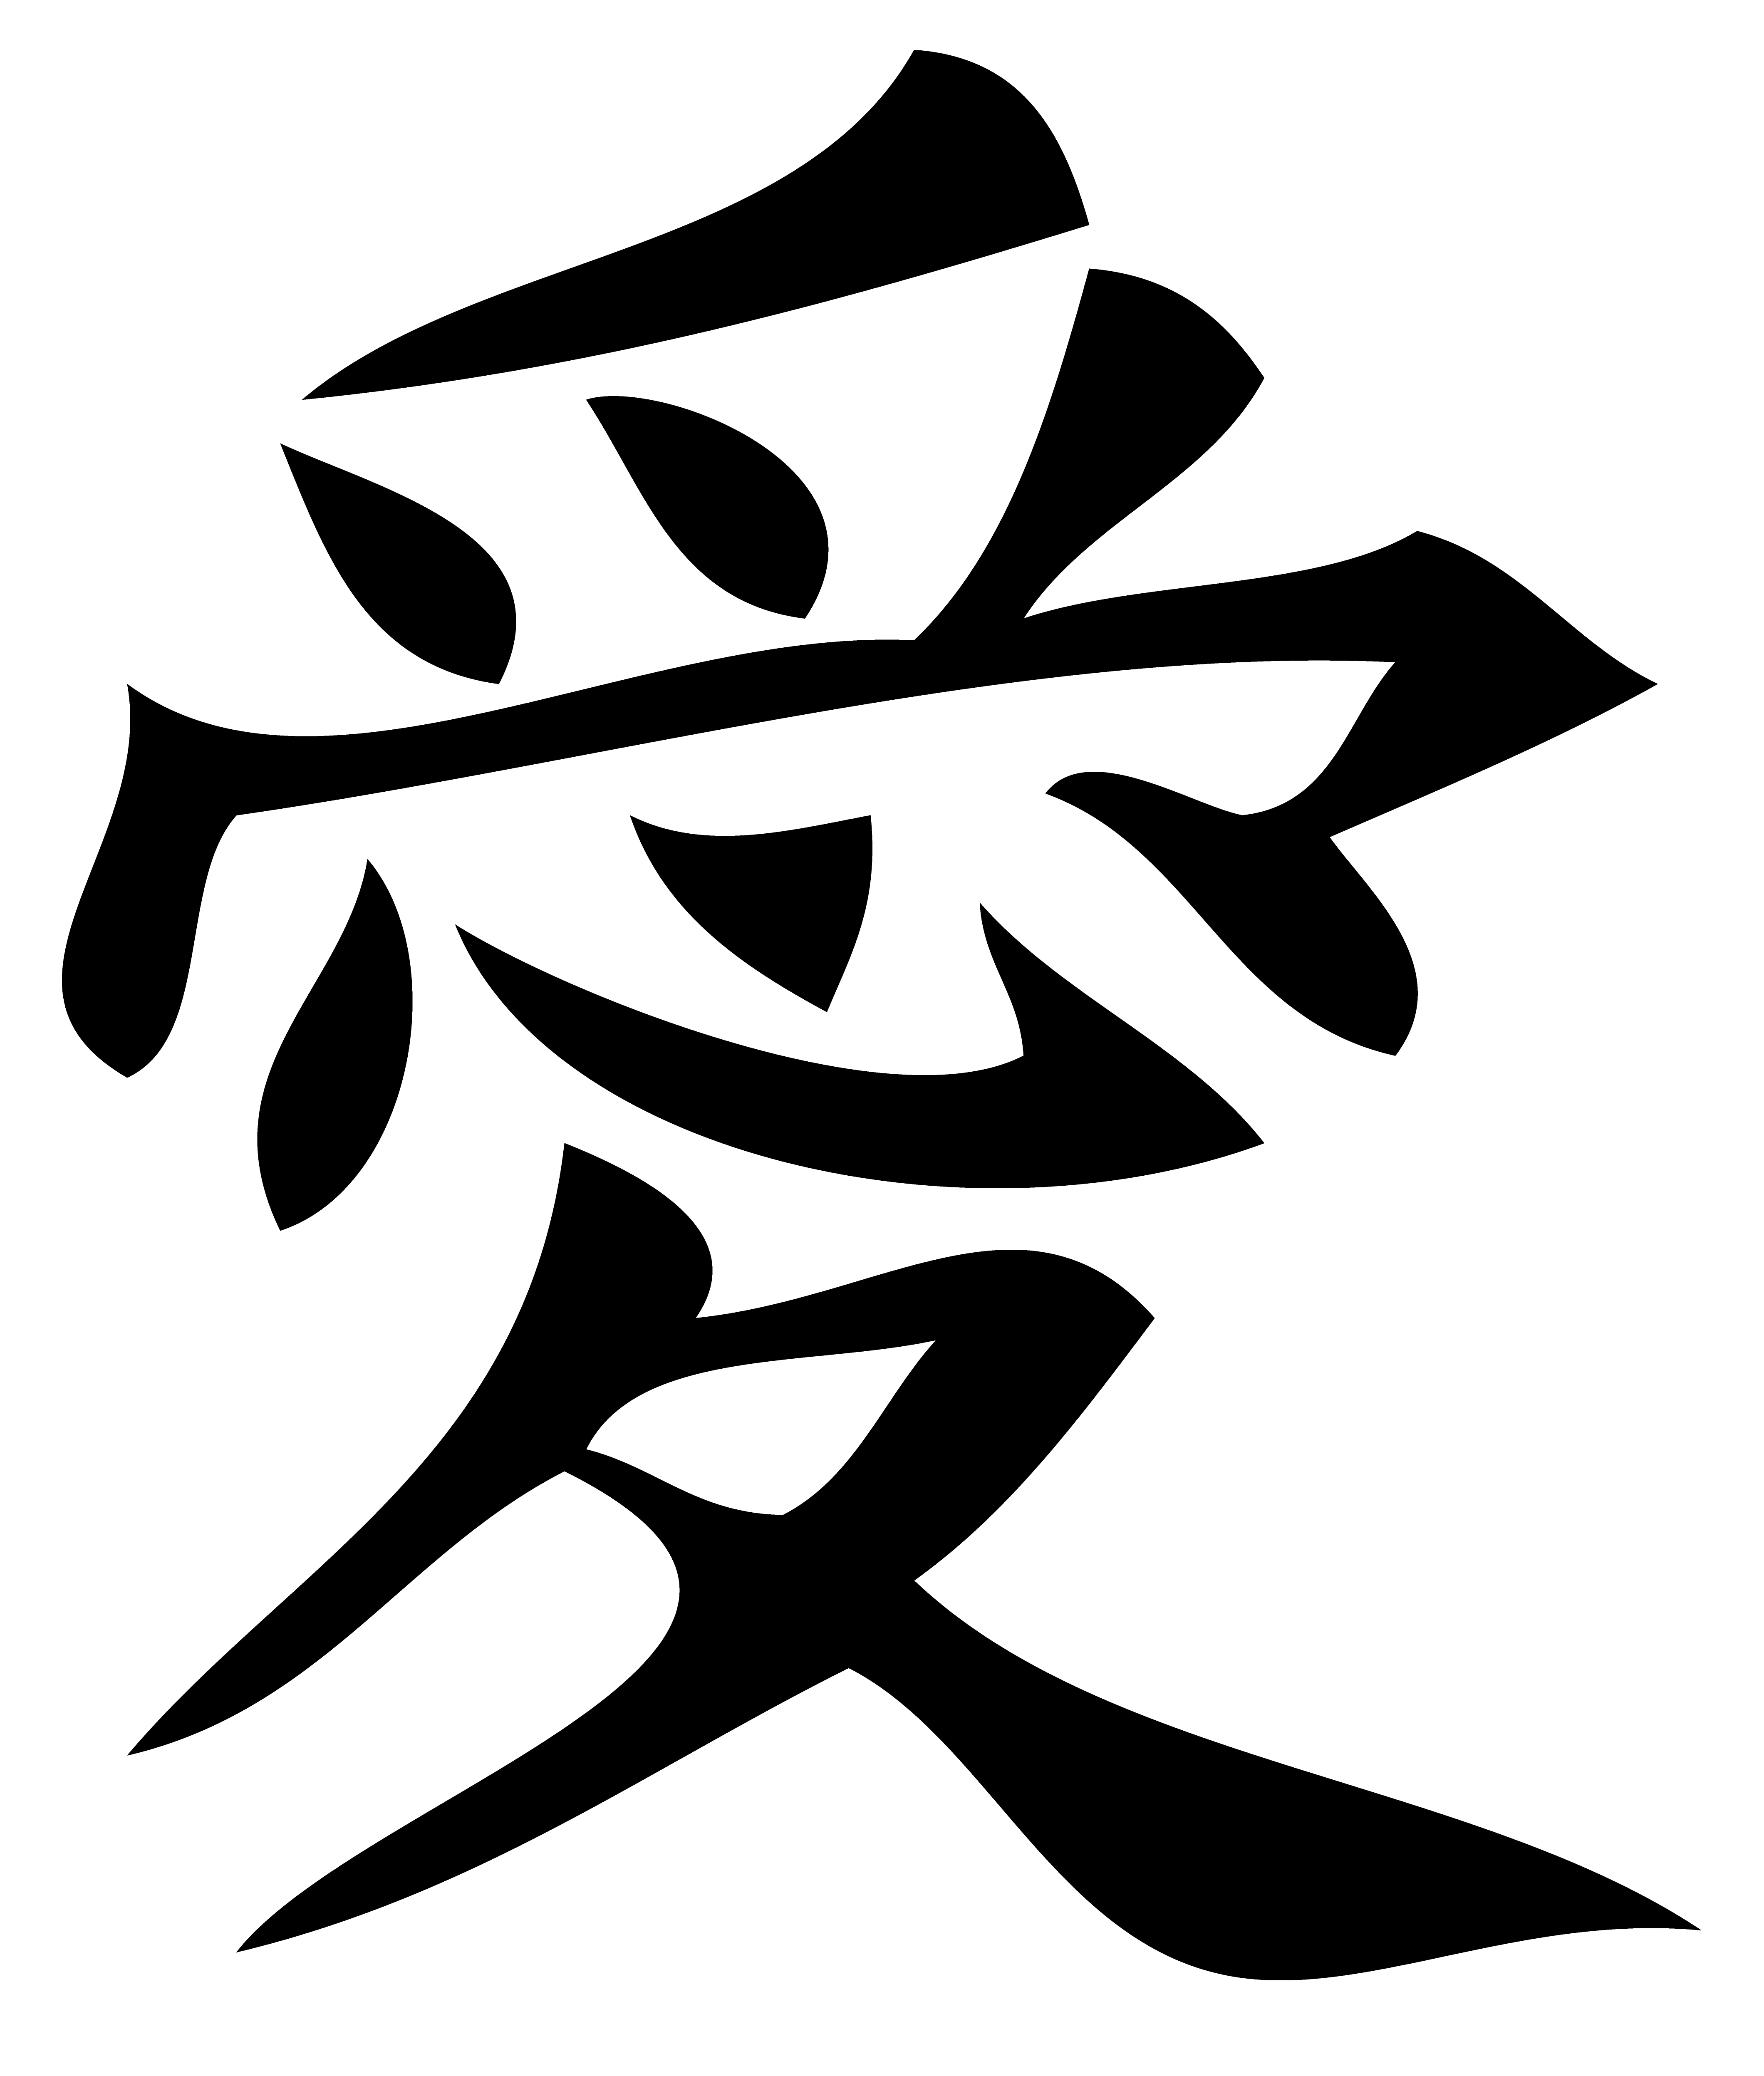 I'm looking forward to get a tattoo and I want some Chinese symbols or word  for happiness. I have this one, and I'd like to know if this symbol is out  of